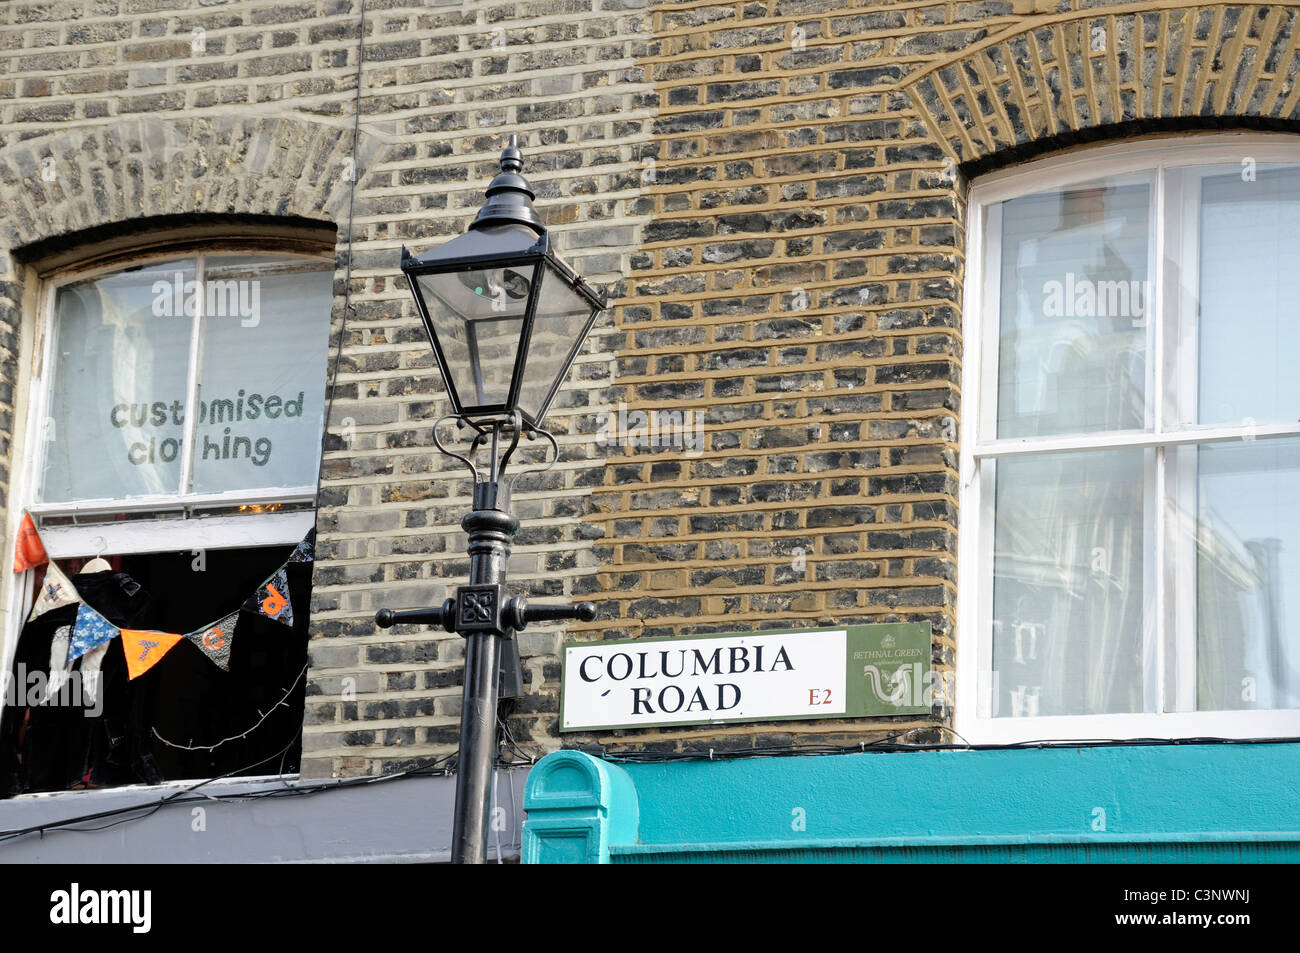 Columbia Road flower market street sign with traditional old fashioned lamppost Bethnal GreenTower Hamlets East London England Stock Photo